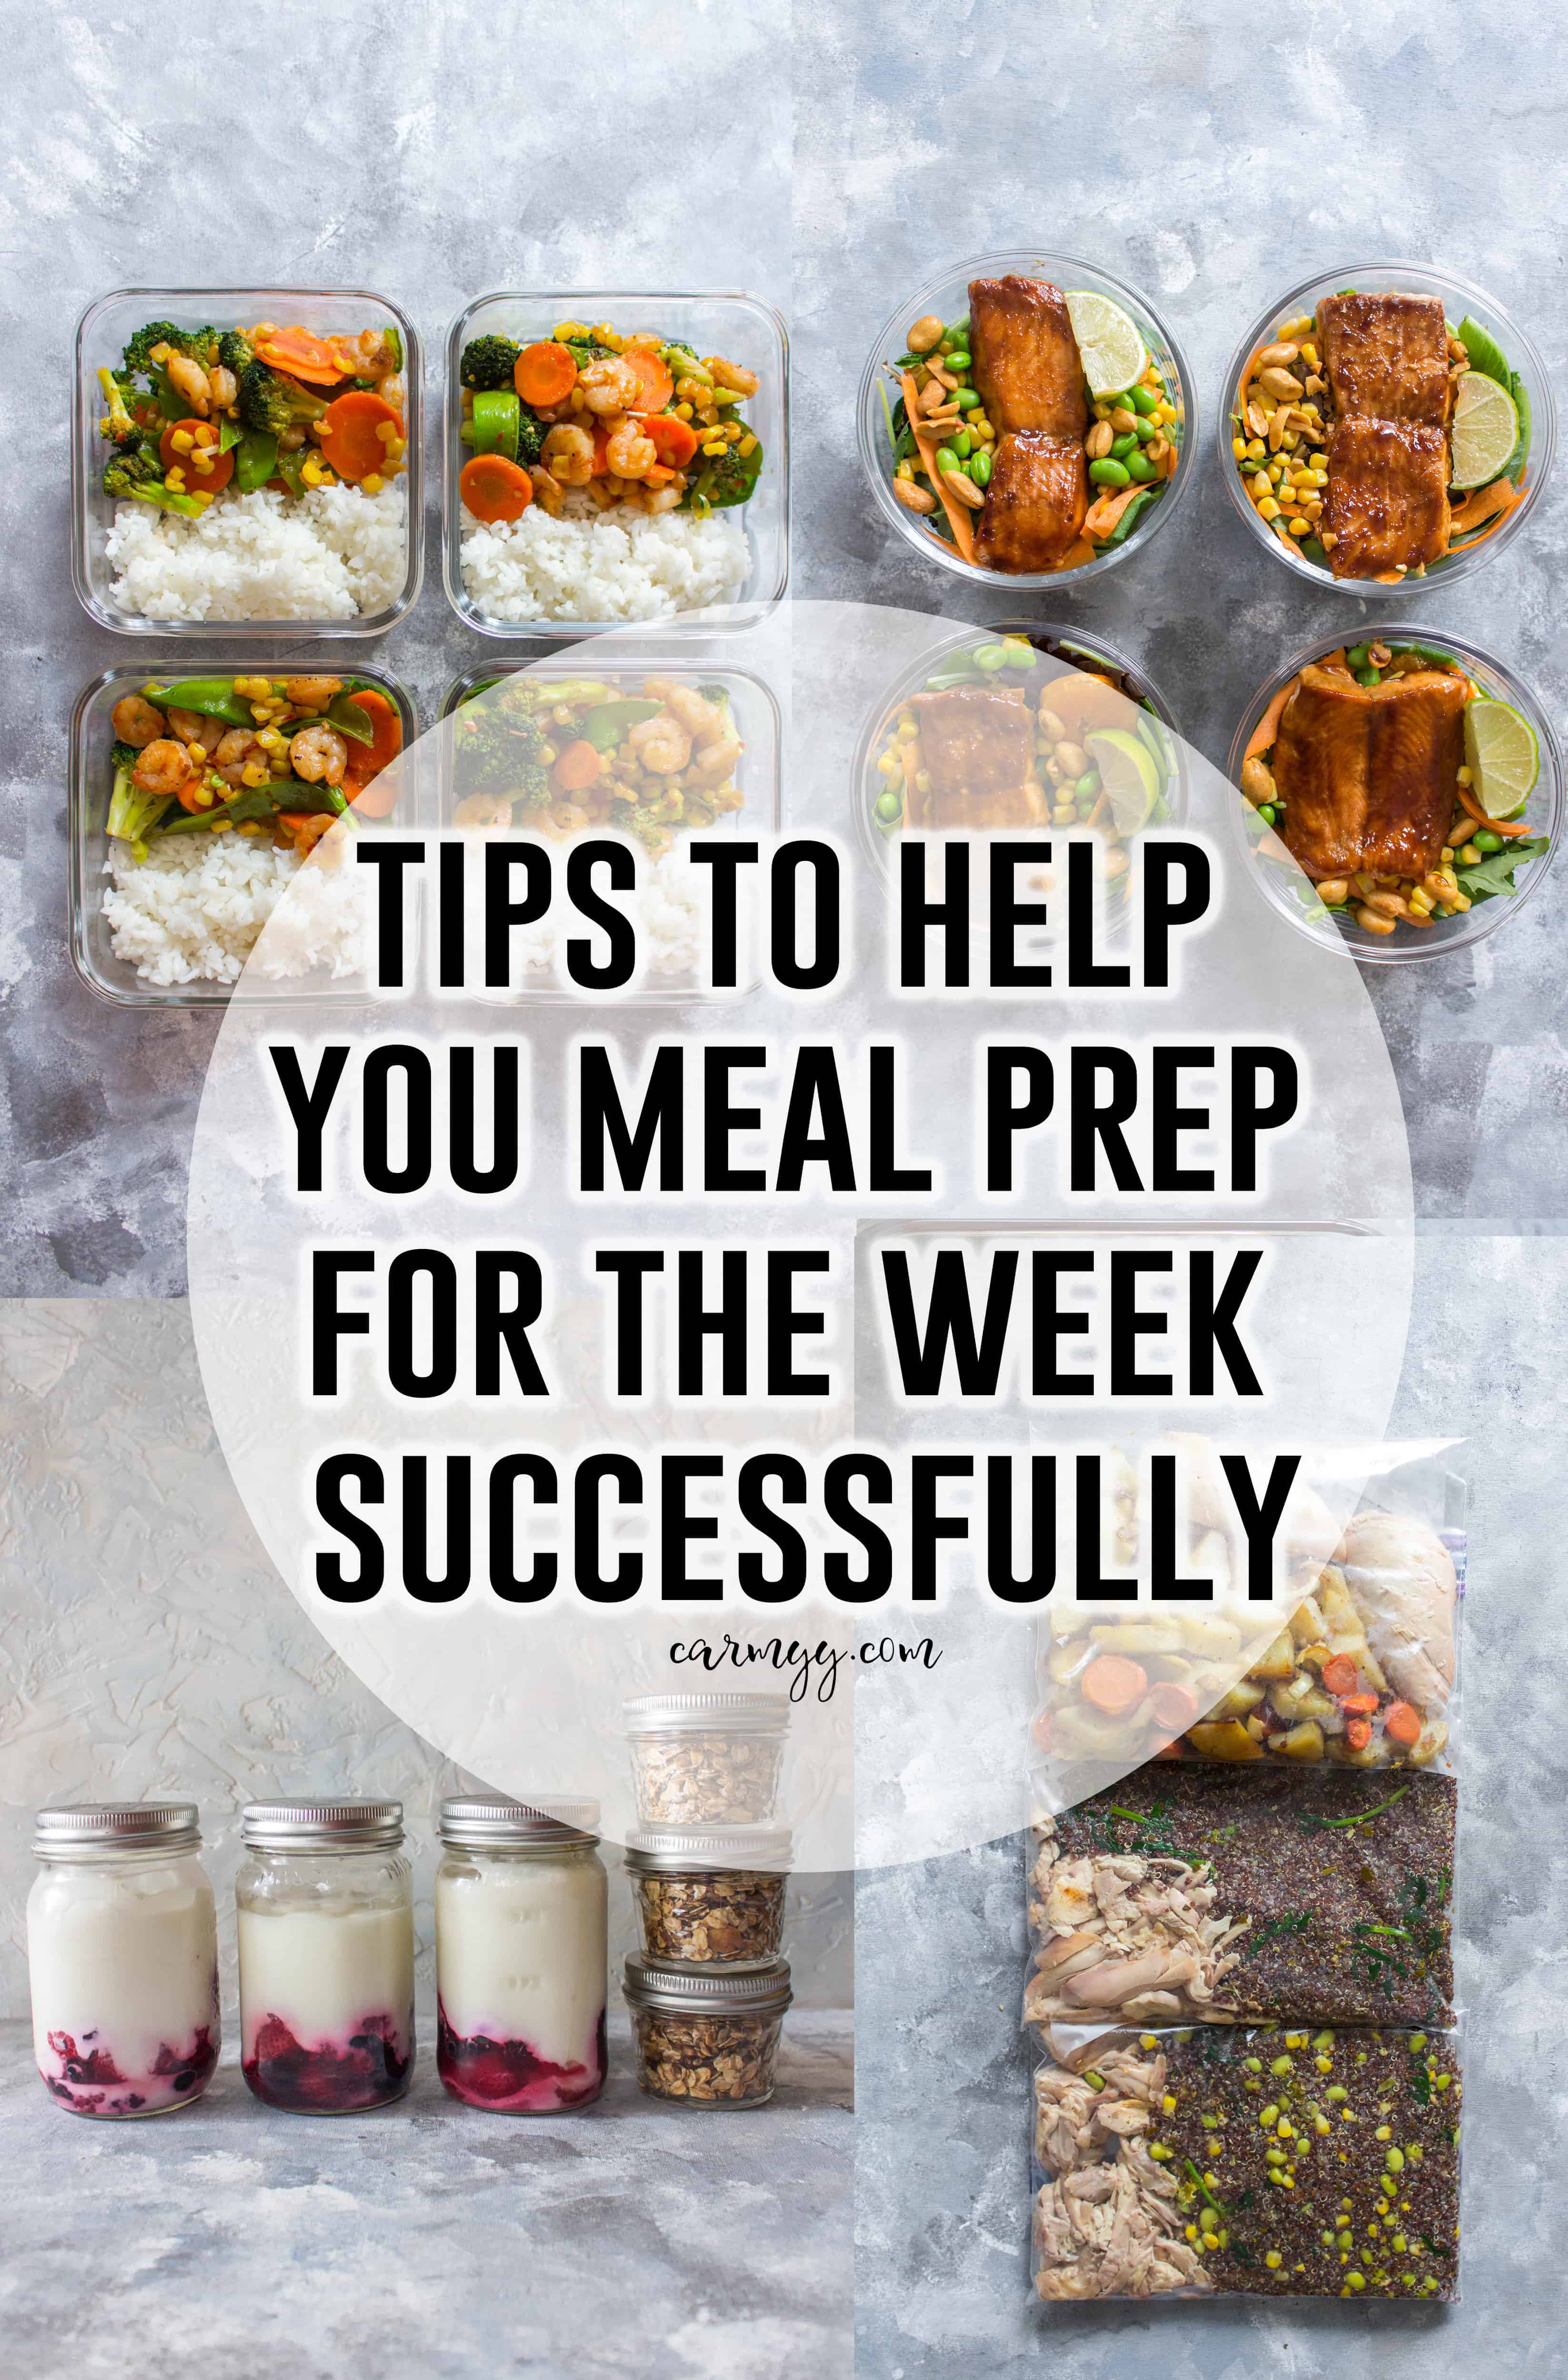 Tips To Help You Meal Prep For the Week Successfully 